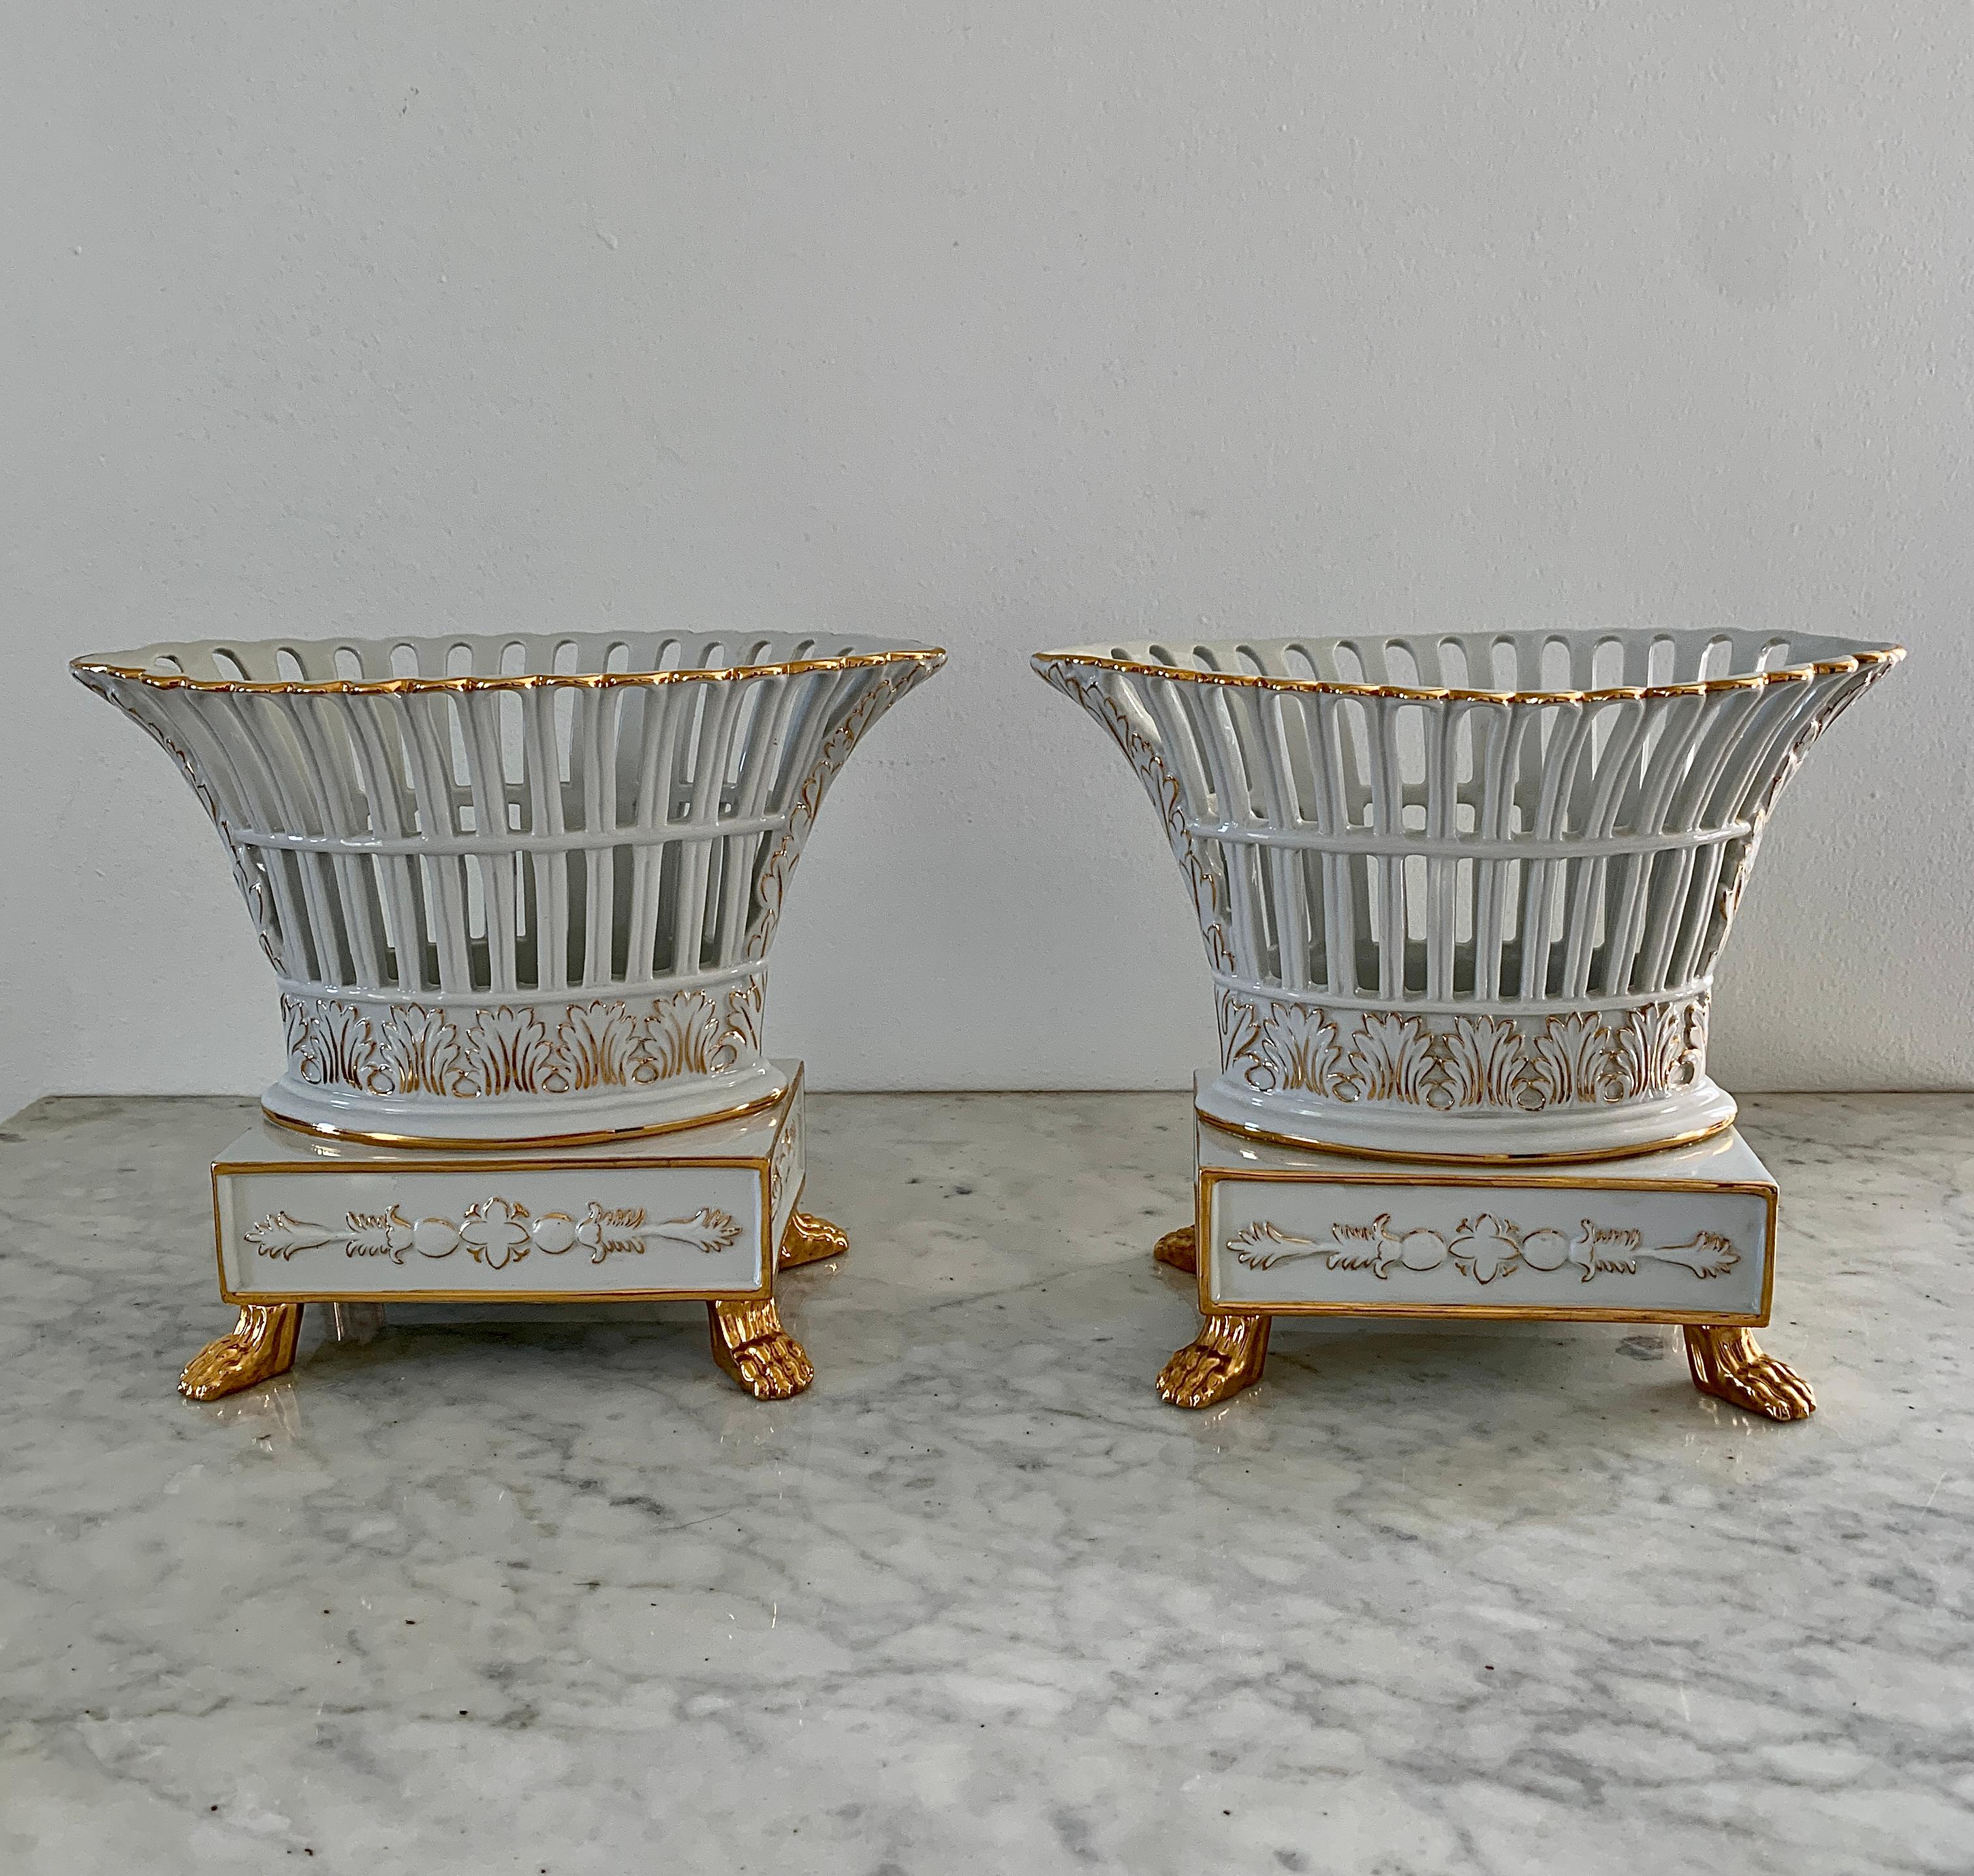 Neoclassical Regency Reticulated Gold Gilt Porcelain Basket Compotes, Pair In Good Condition For Sale In Elkhart, IN